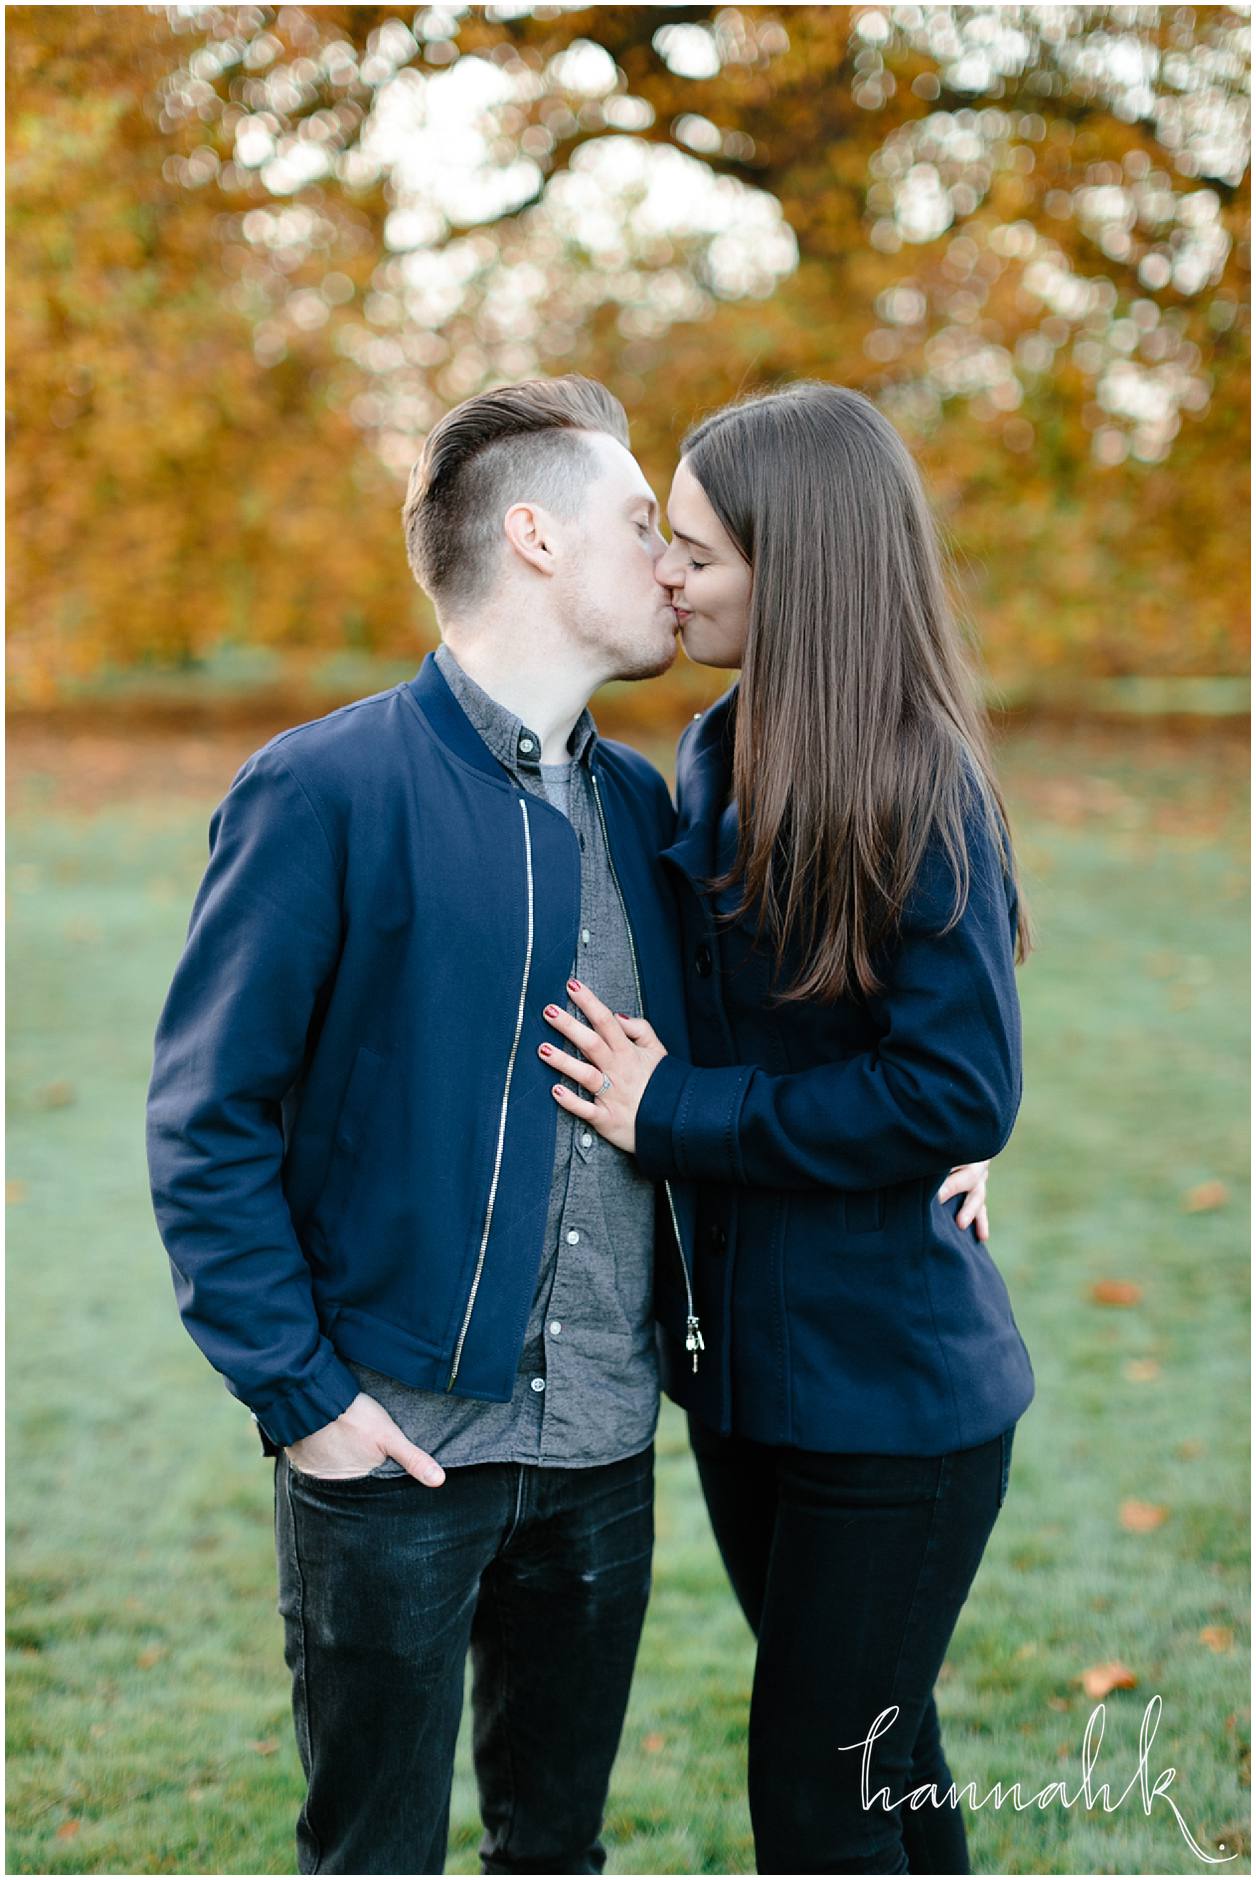 hannah-k-photography-coventry-warwickshire-west-midlands-engagement-photographer-43